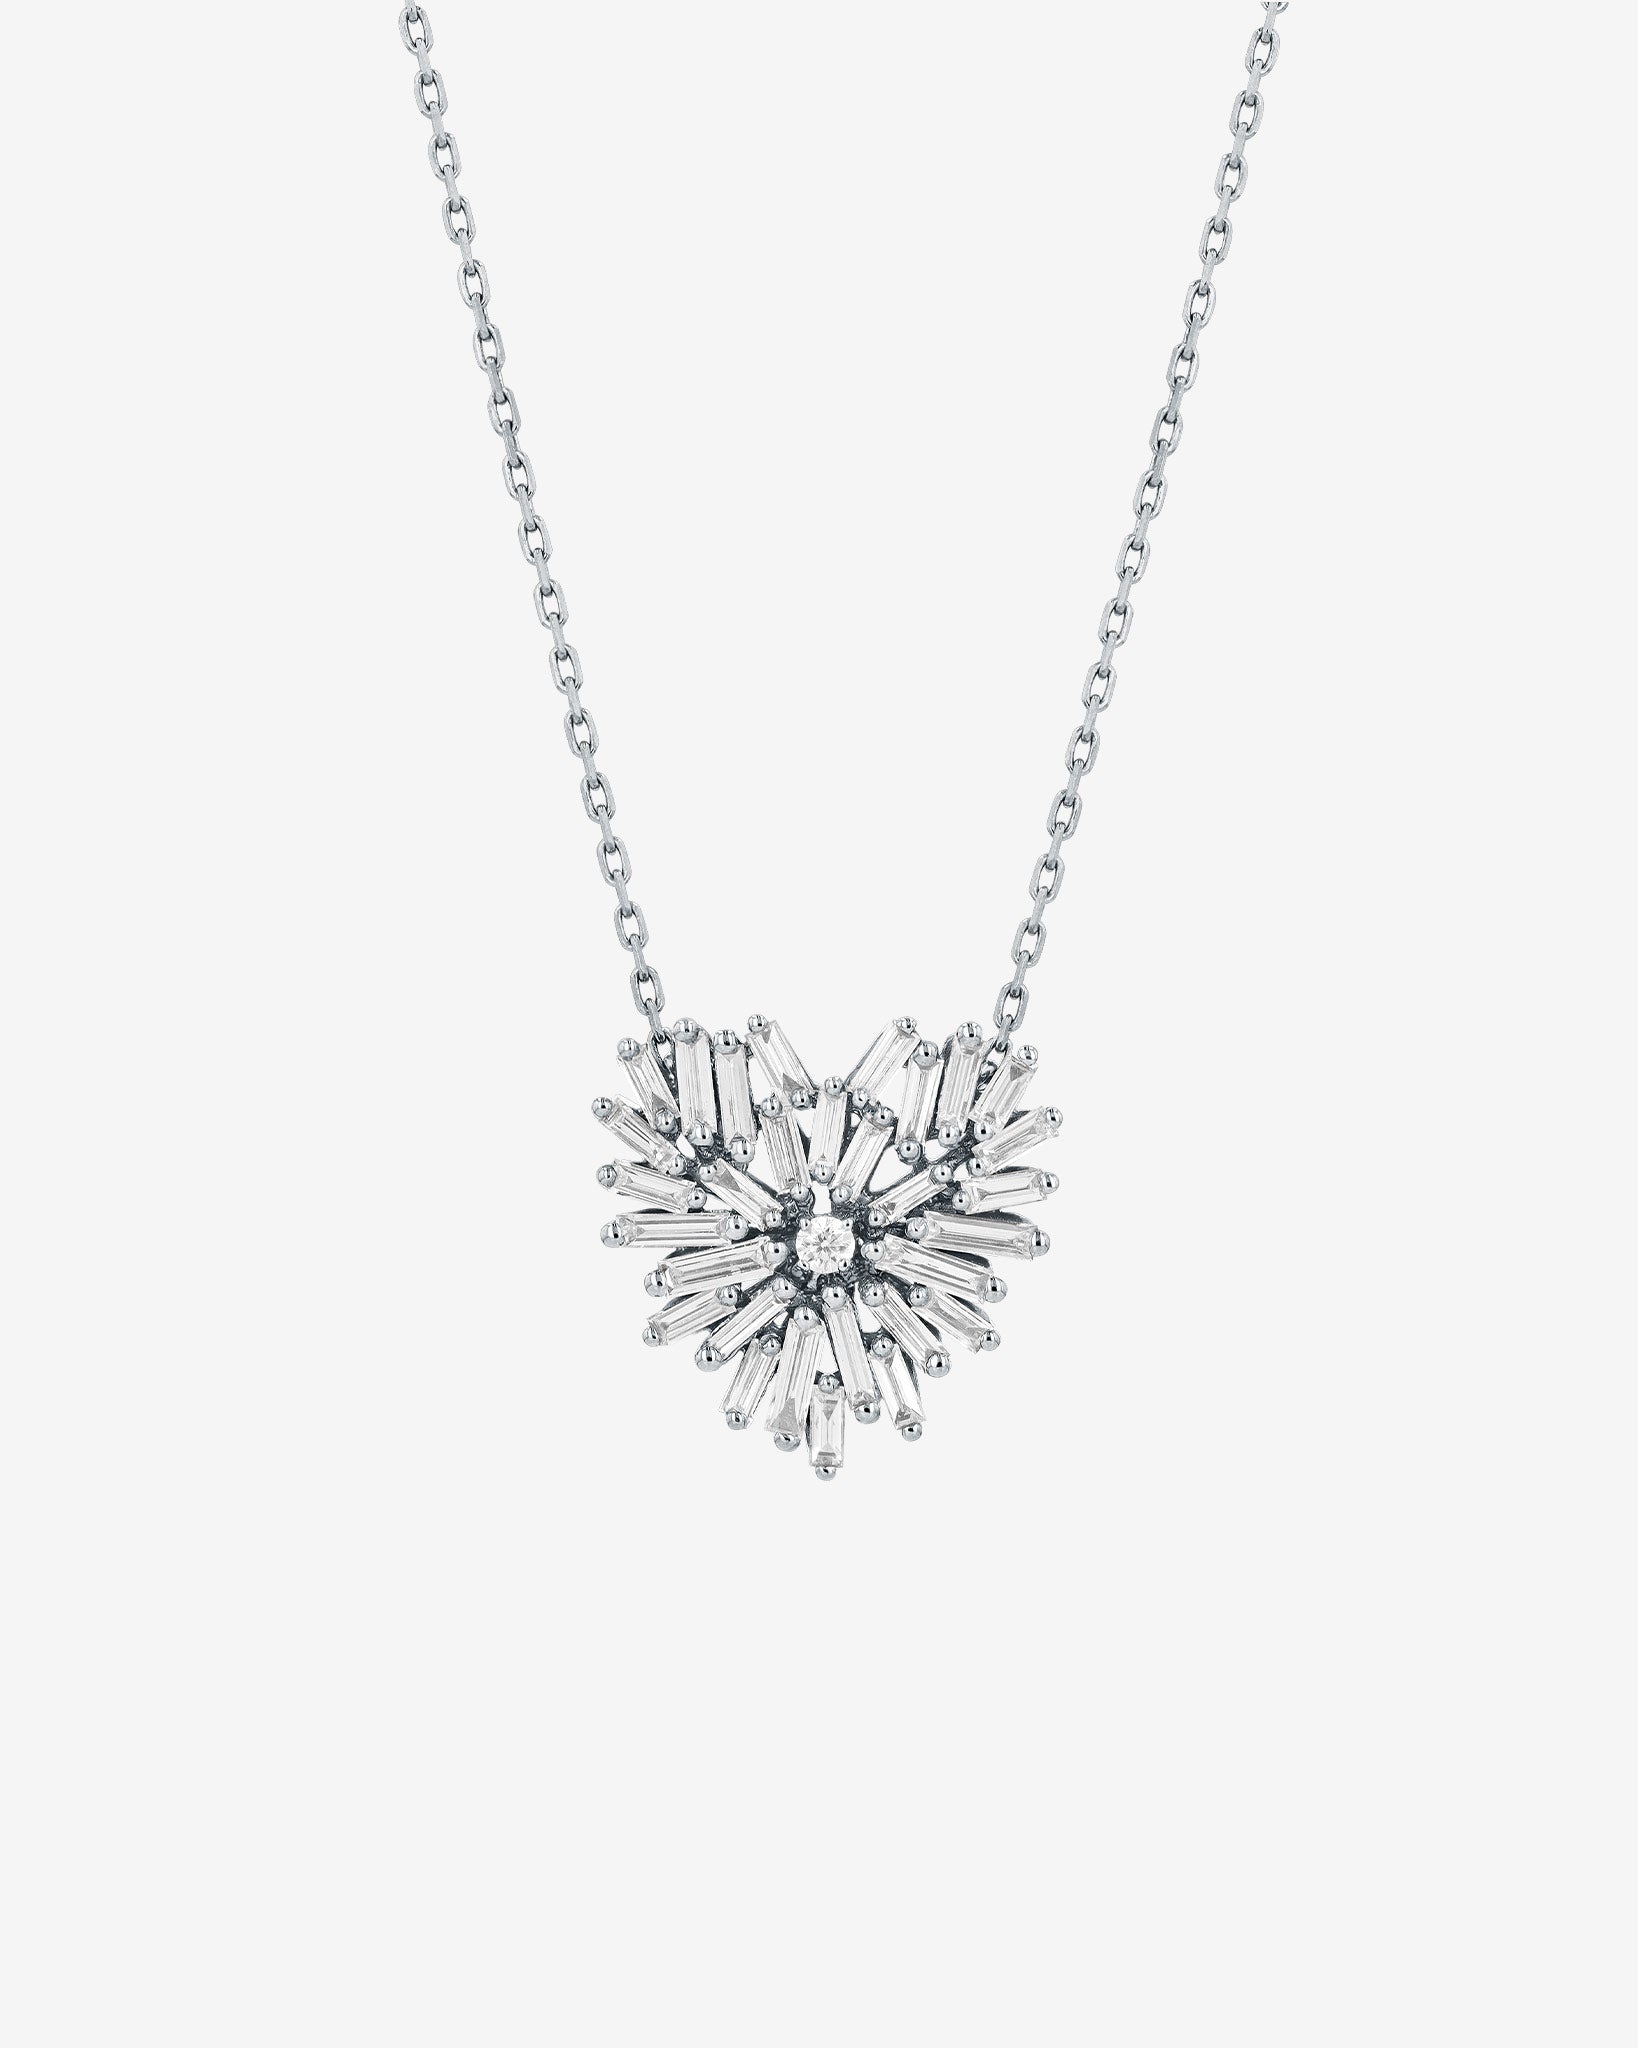 Suzanne Kalan Classic Diamond Small Heart Necklace in 18k white gold